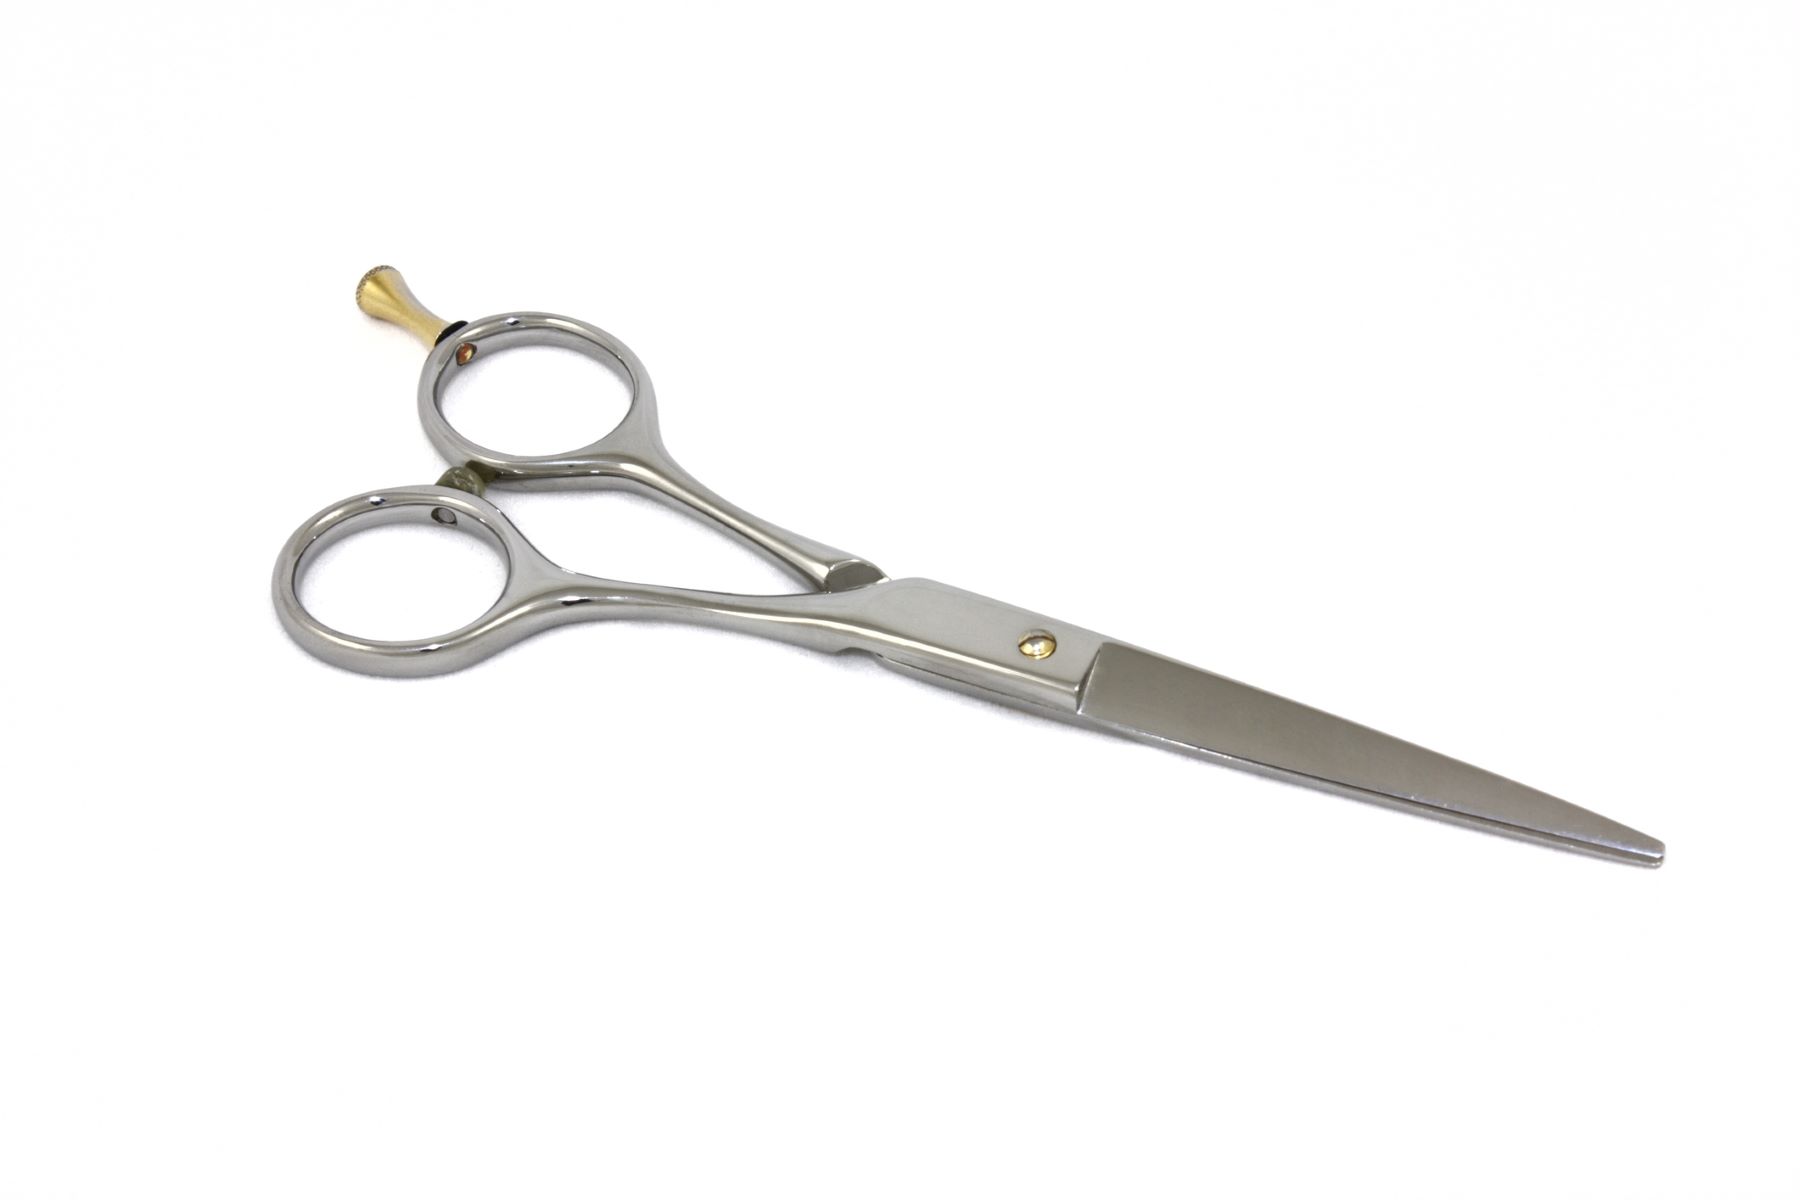 A pair of long, thin barber’s shears